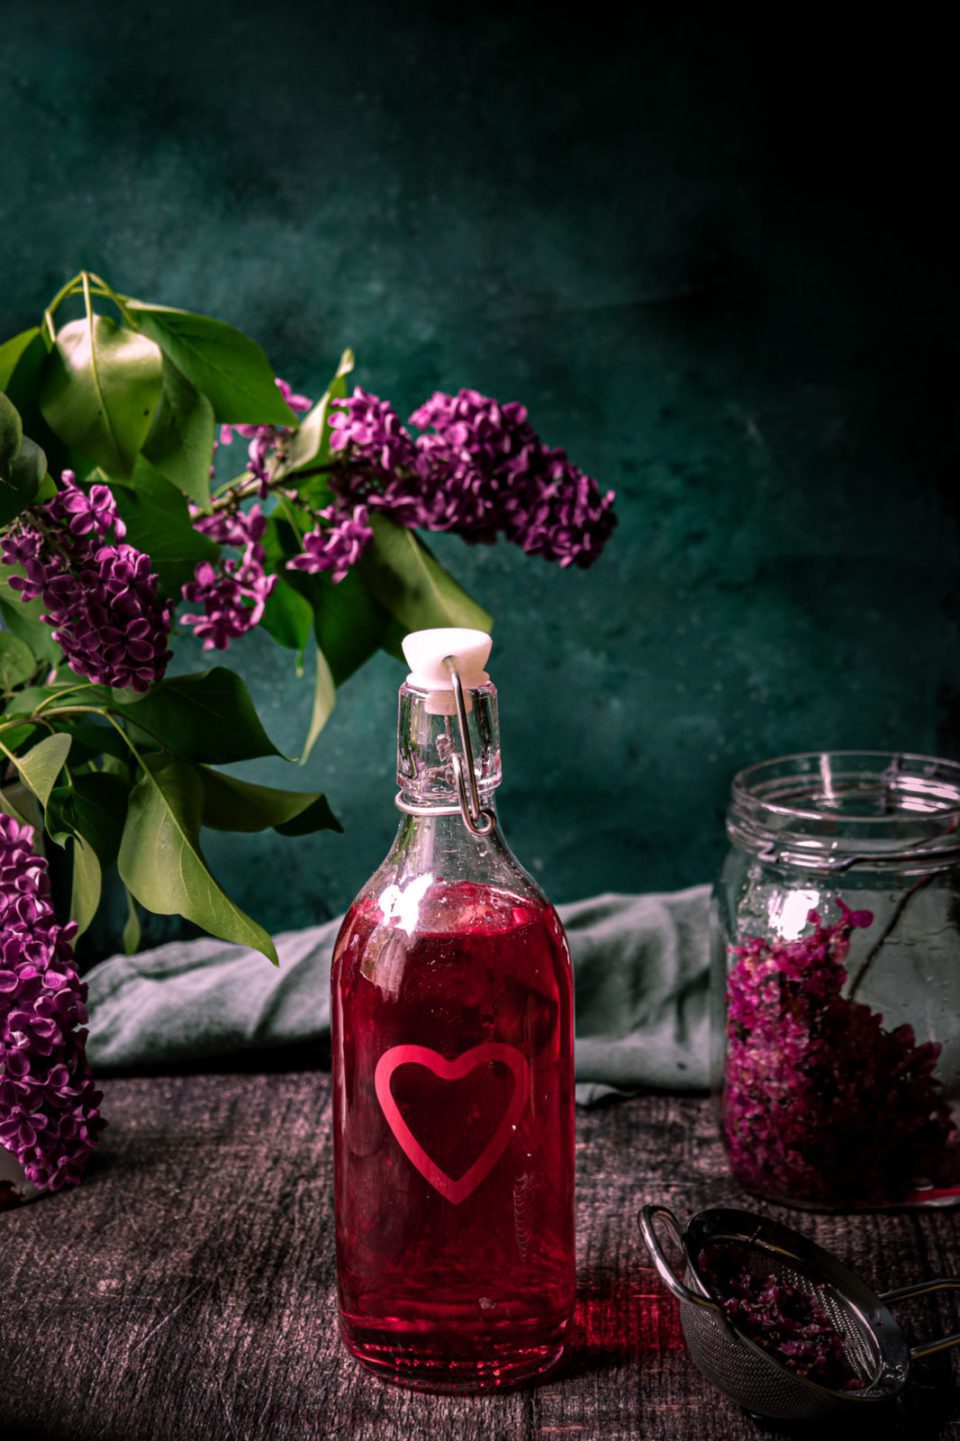 lilac syrup recipe, simple syrup